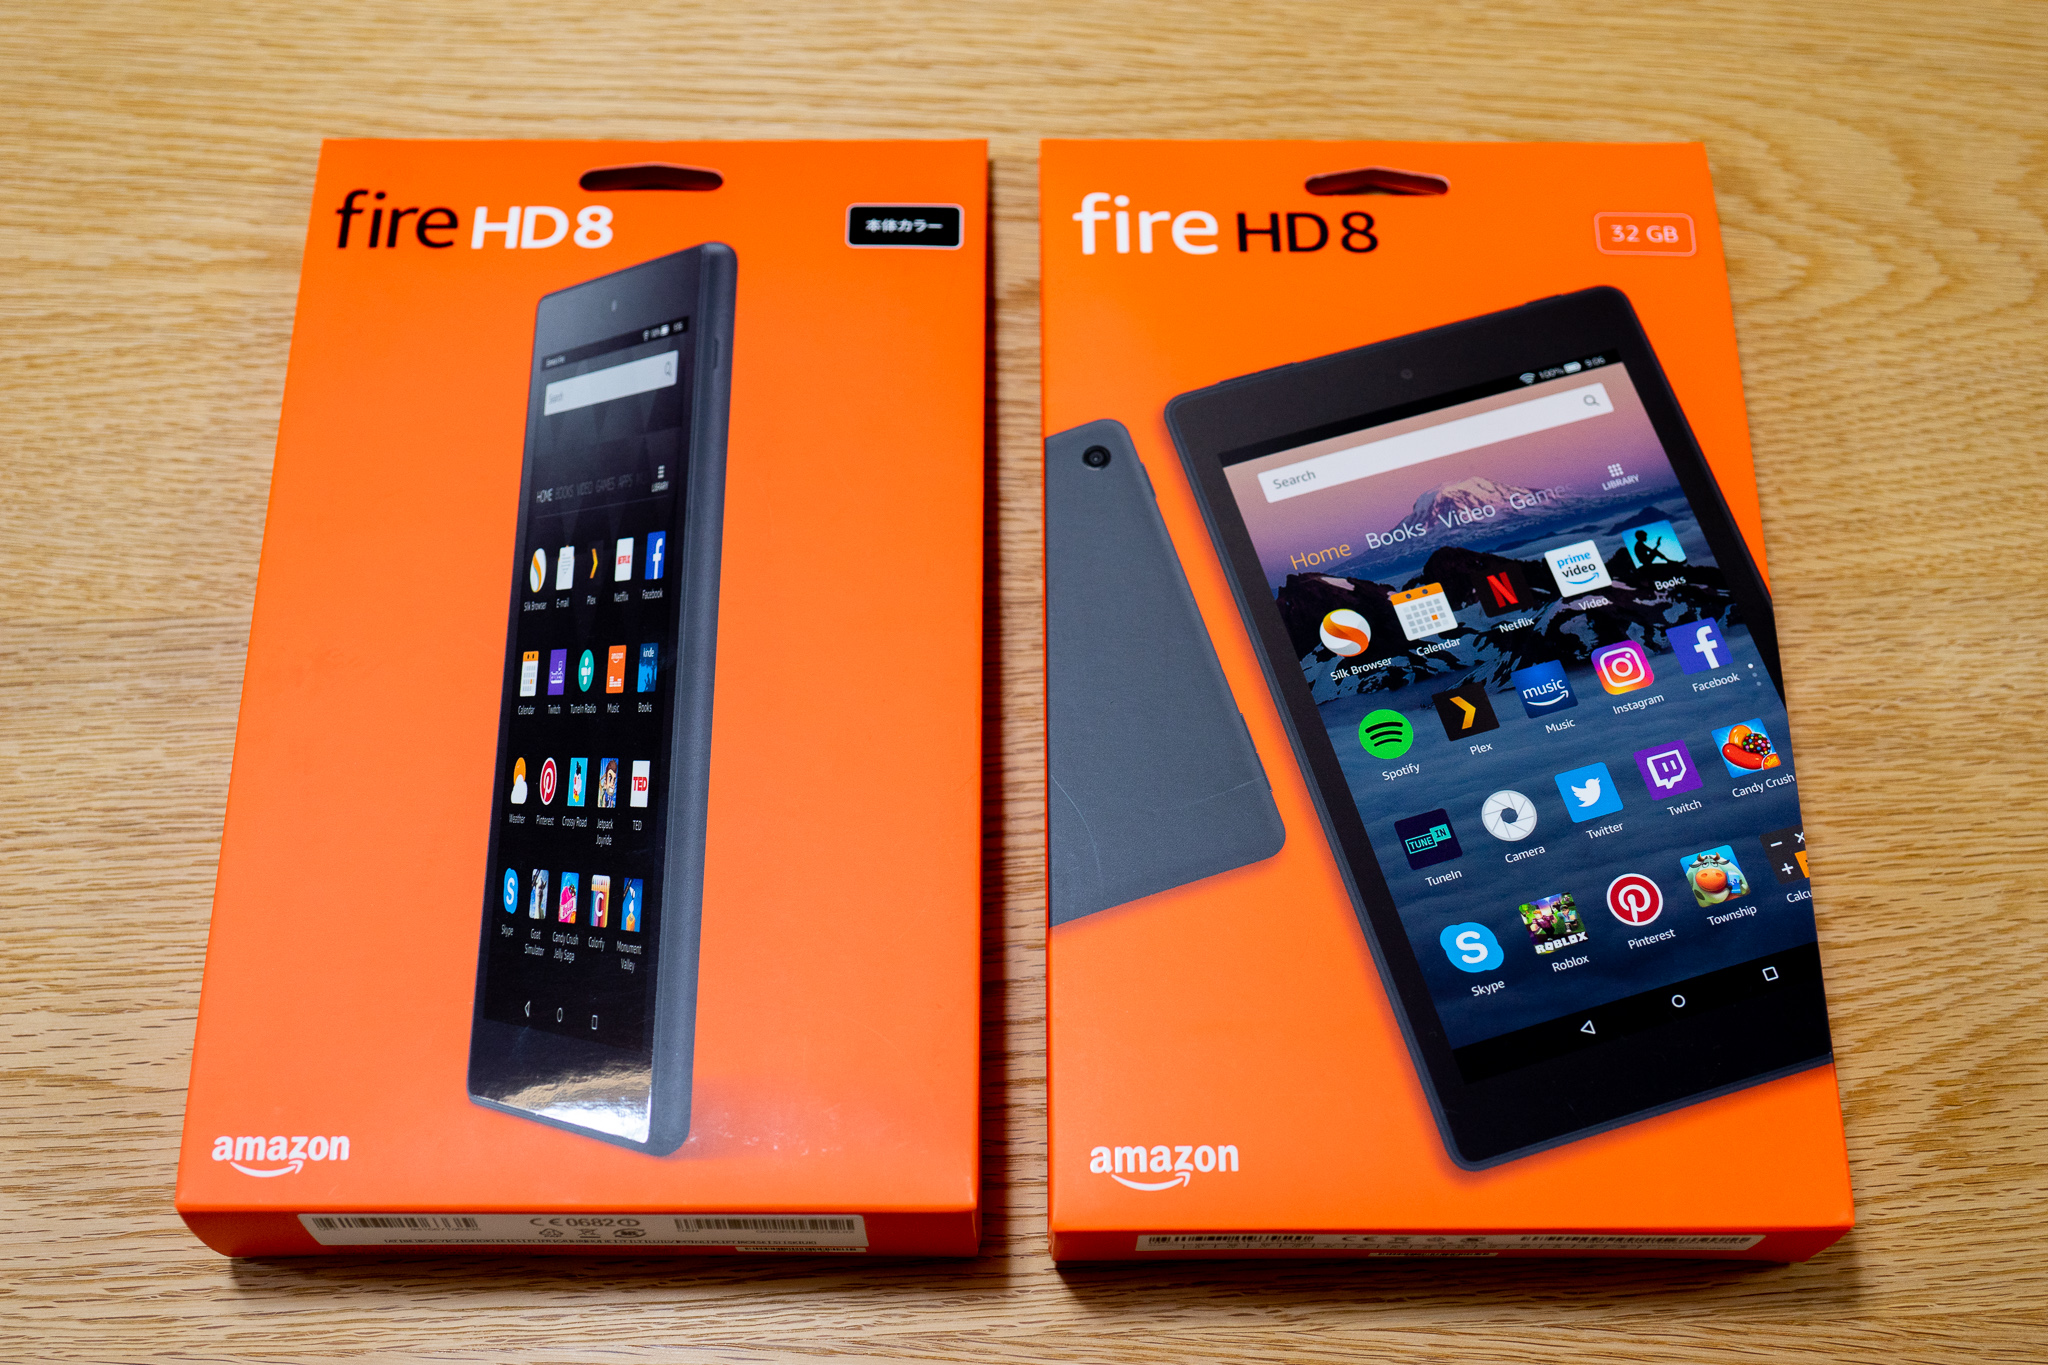 Fire HD 8　16GBPC/タブレット